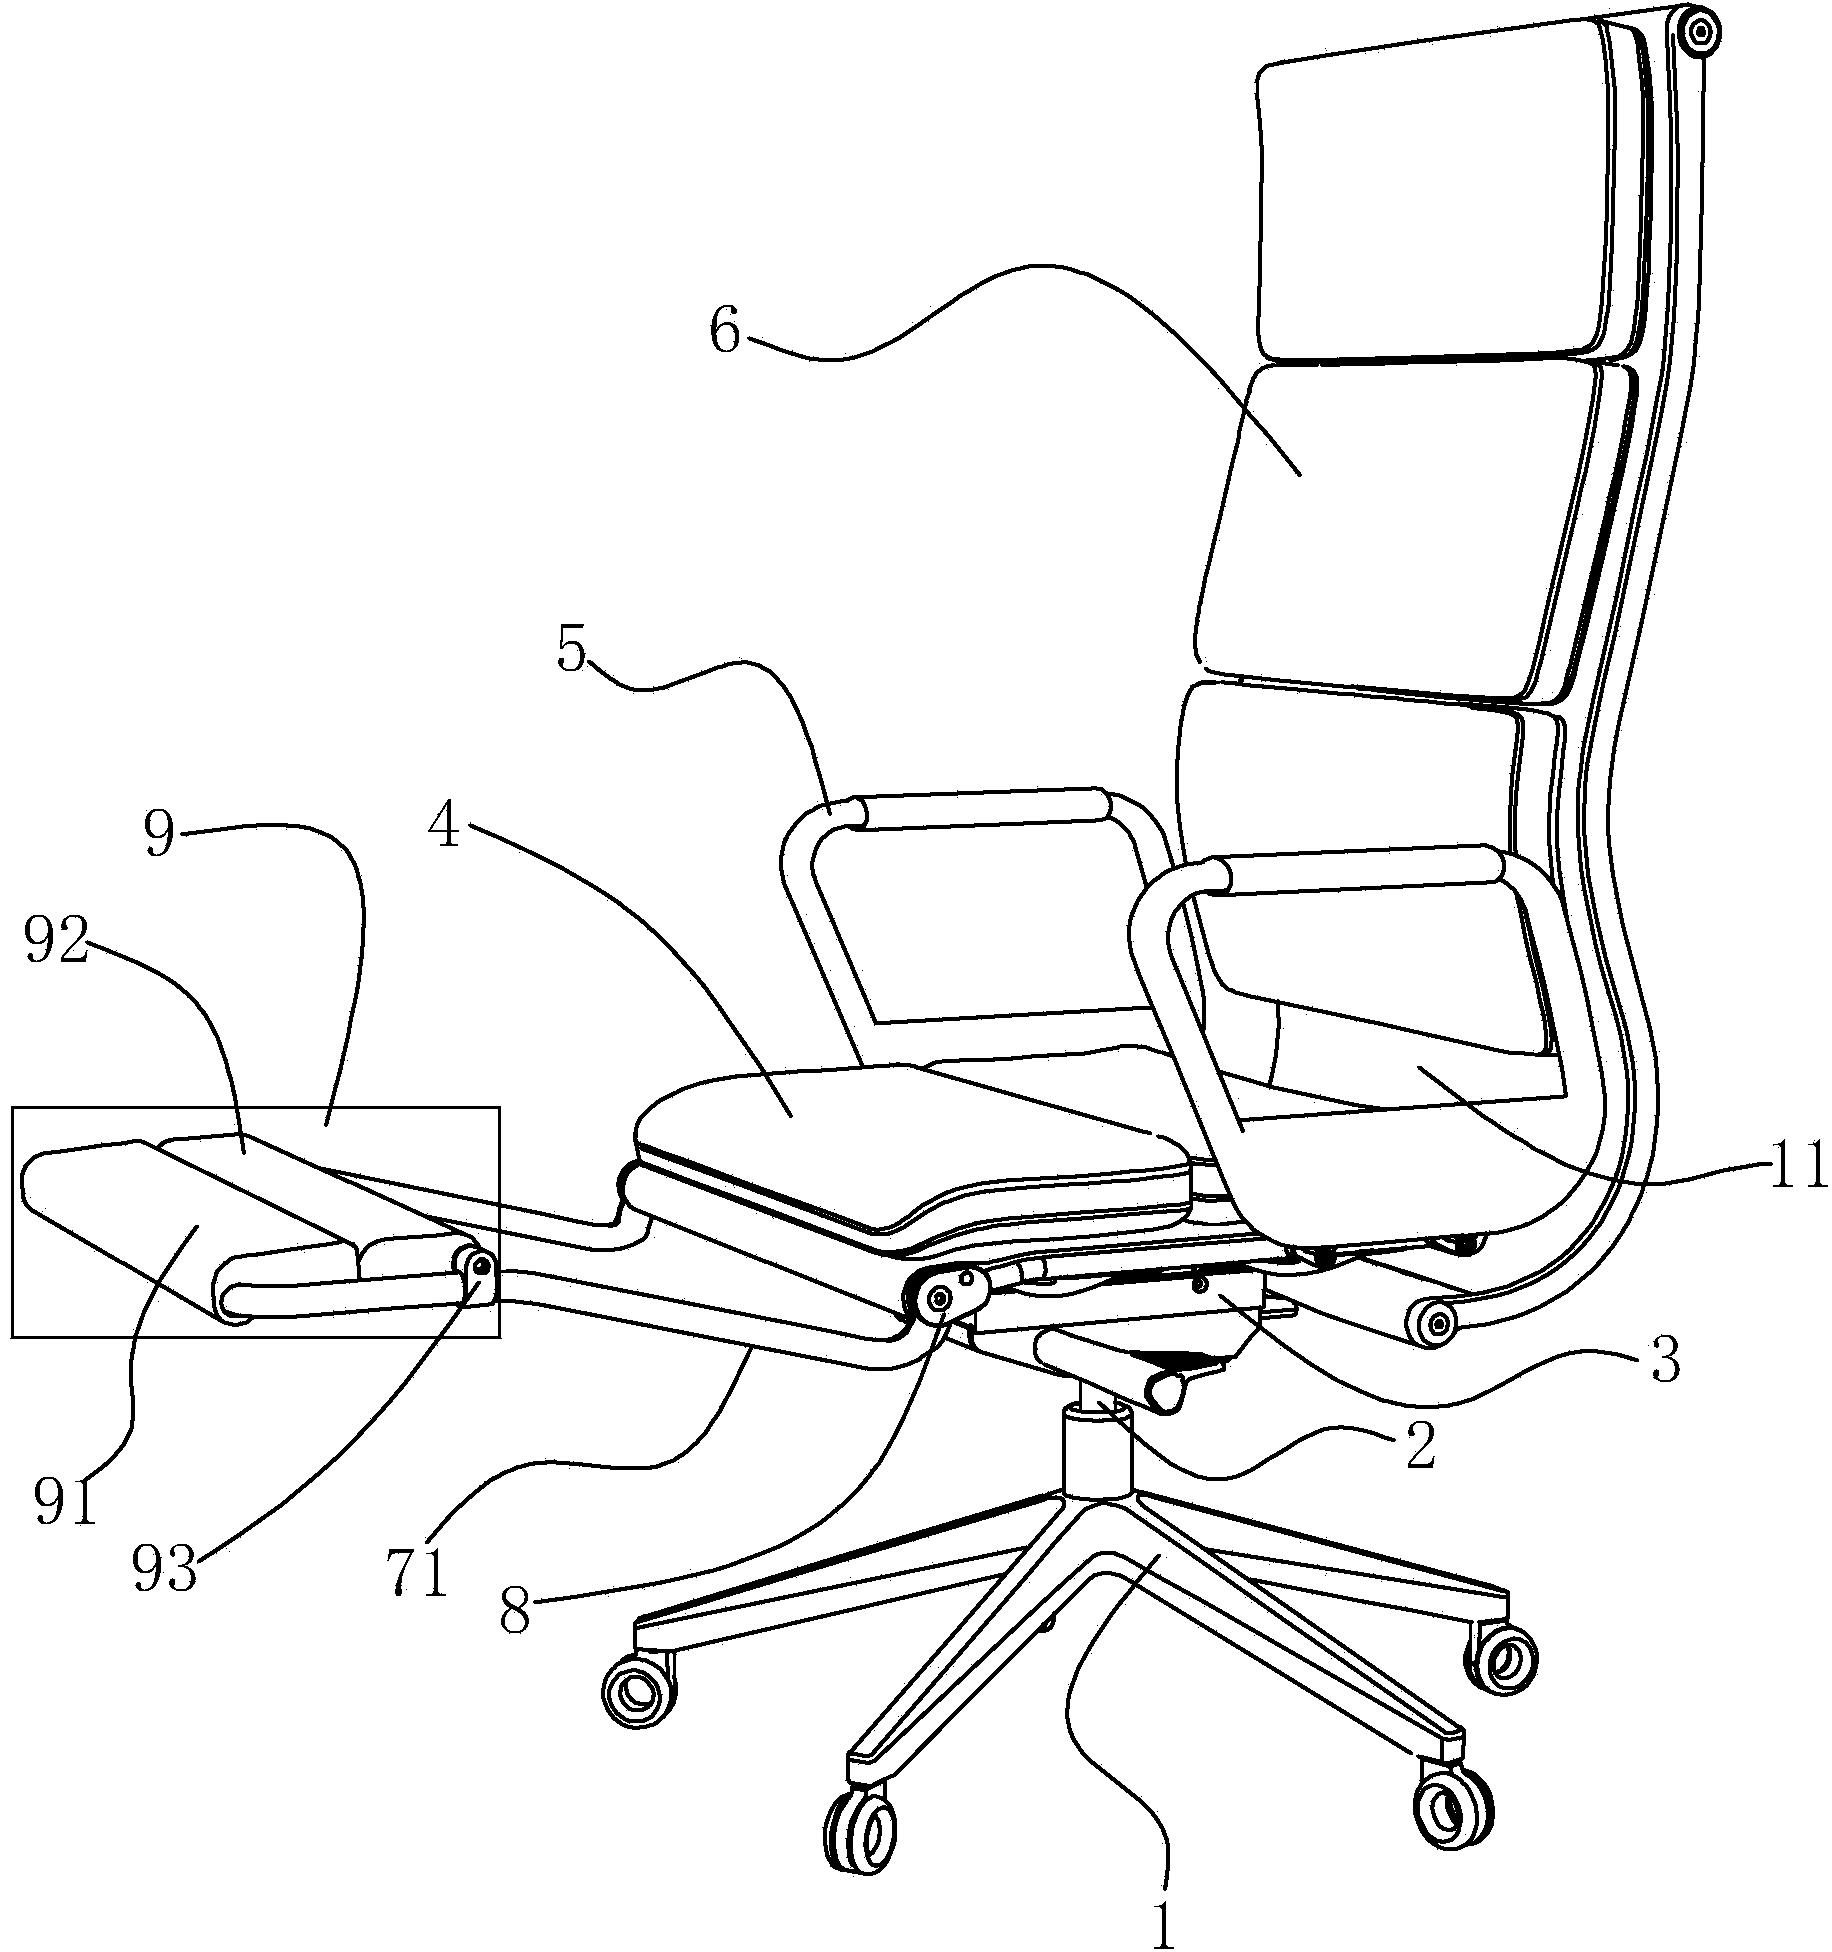 Chair providing convenience for people to have rest